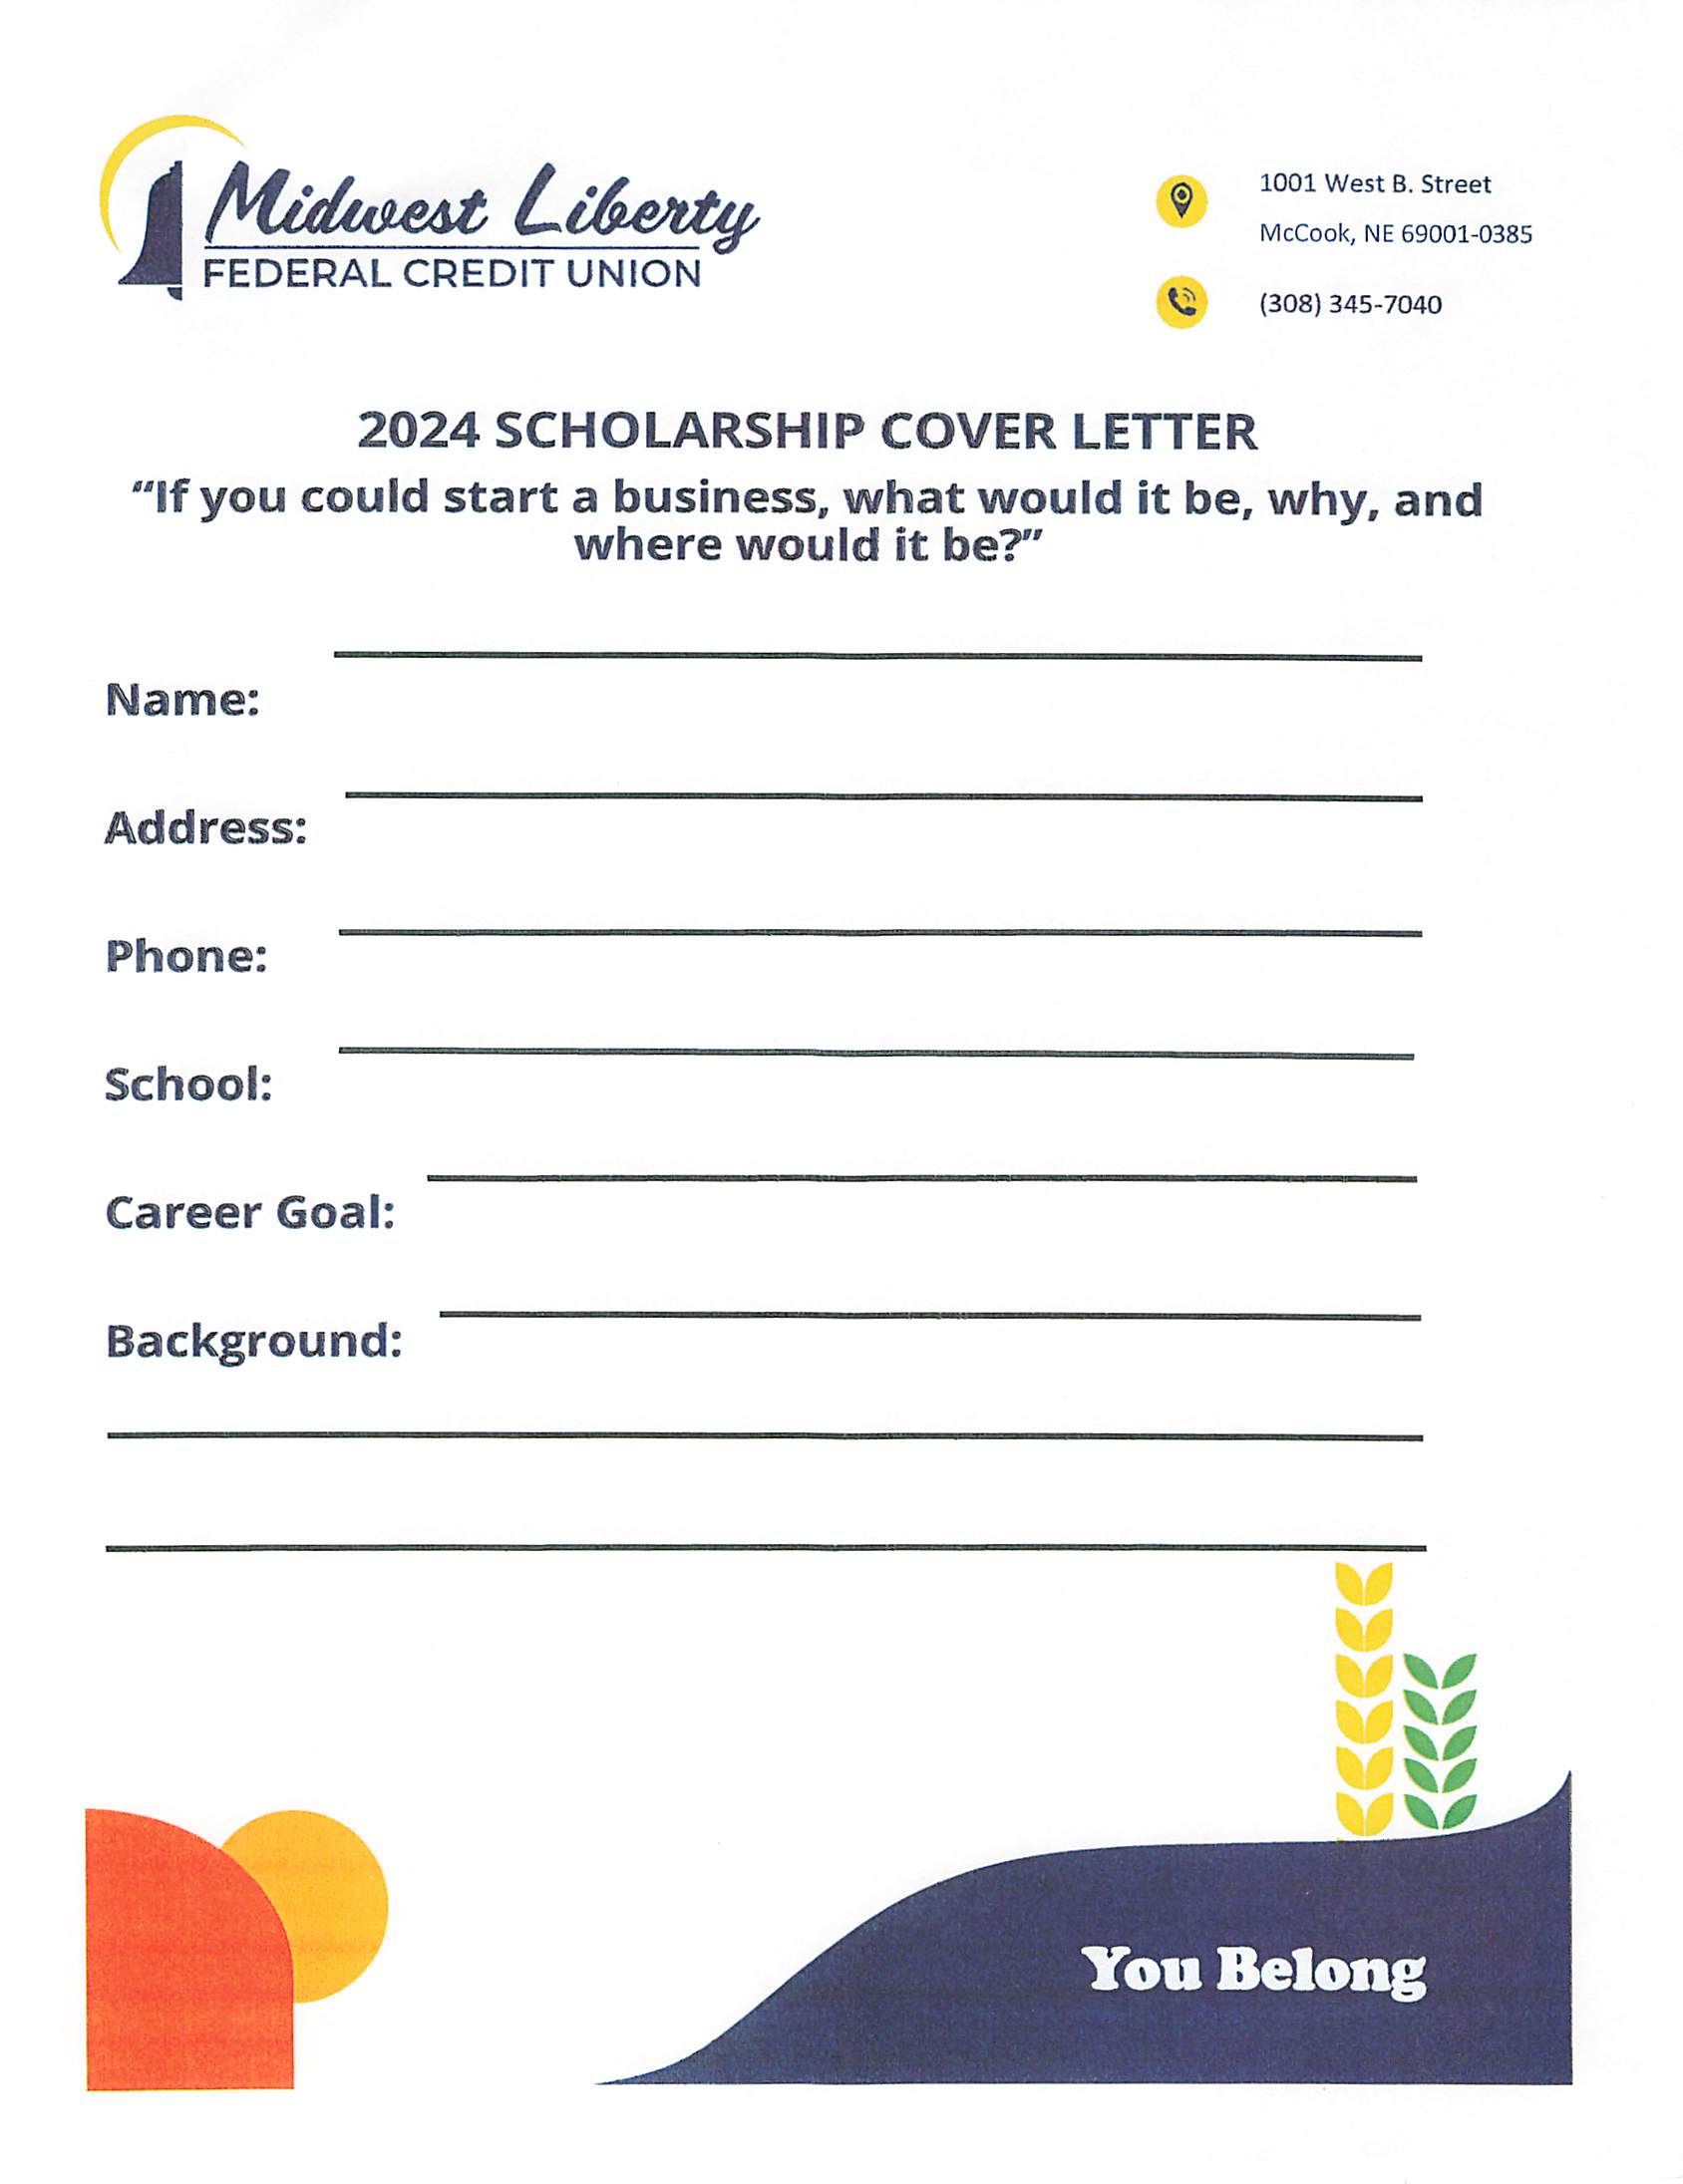 Midwest Liberty Federal Credit Union Scholarship Cover Letter